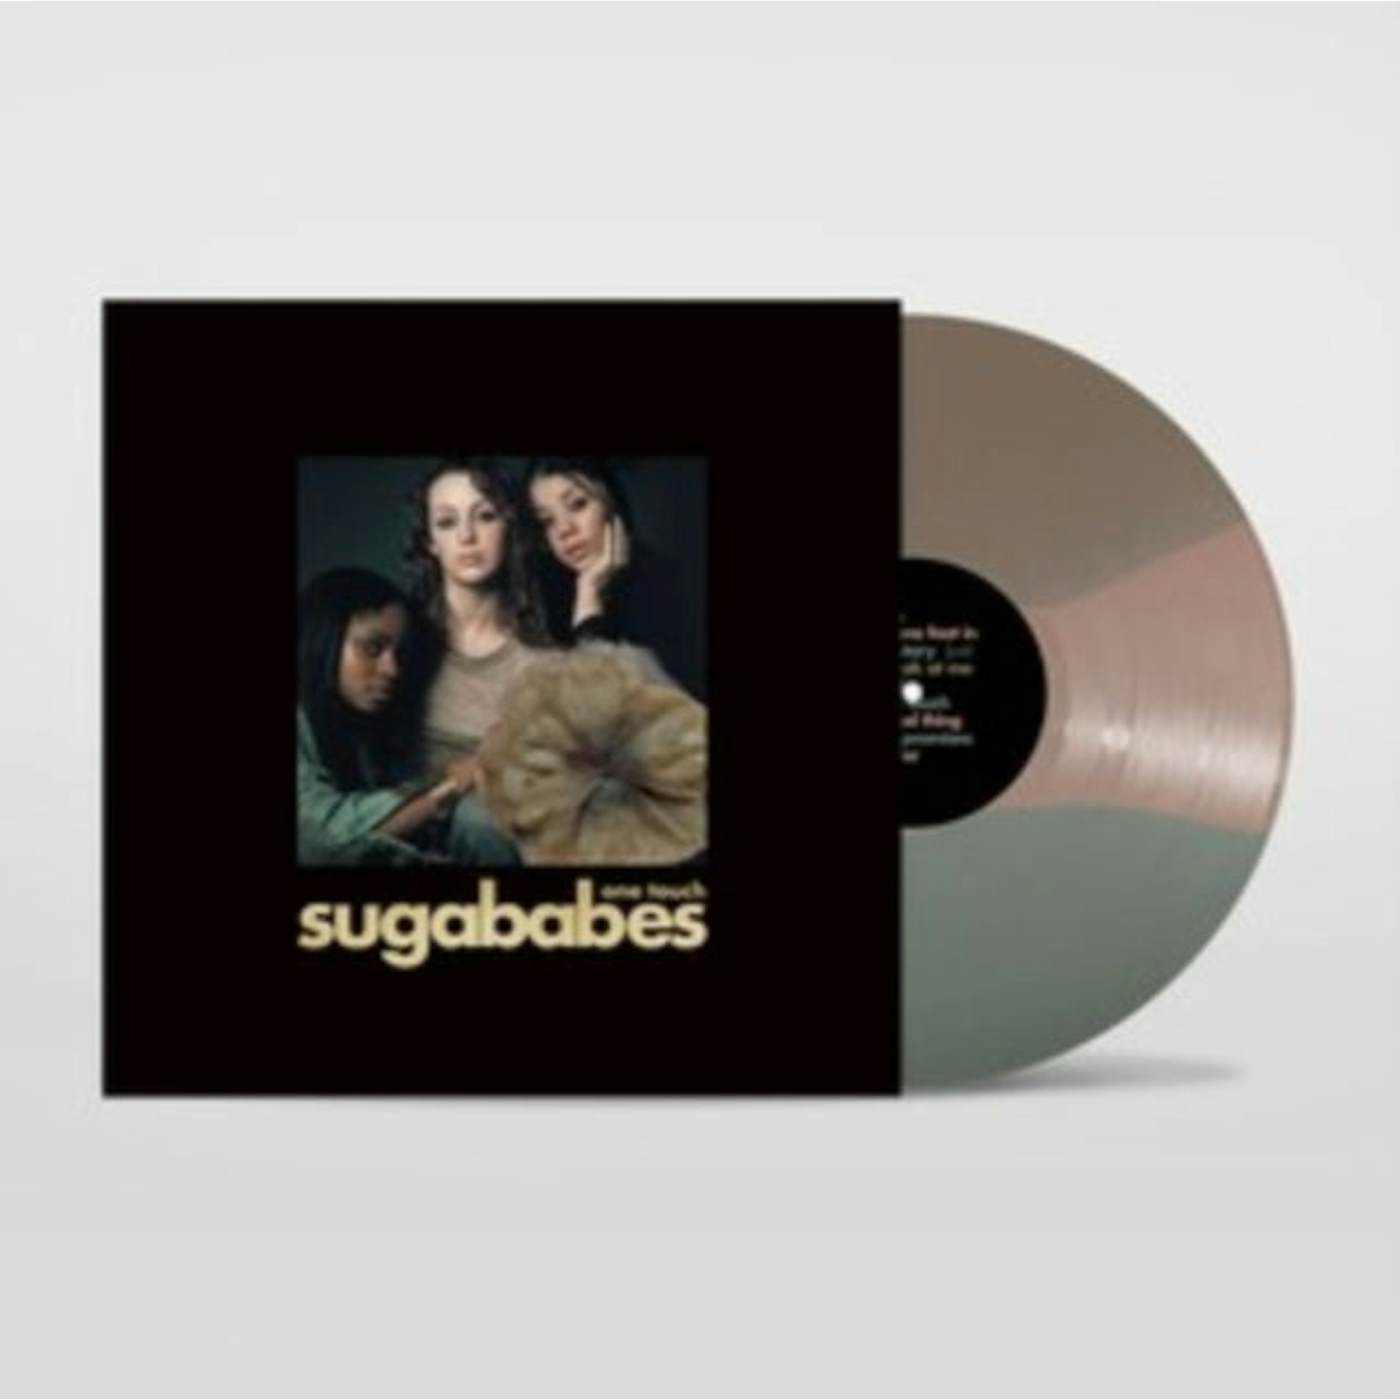 Sugababes LP Vinyl Record - Sugababes One Touch (20.  Year Anniversary Edition) (Deluxe Edition)